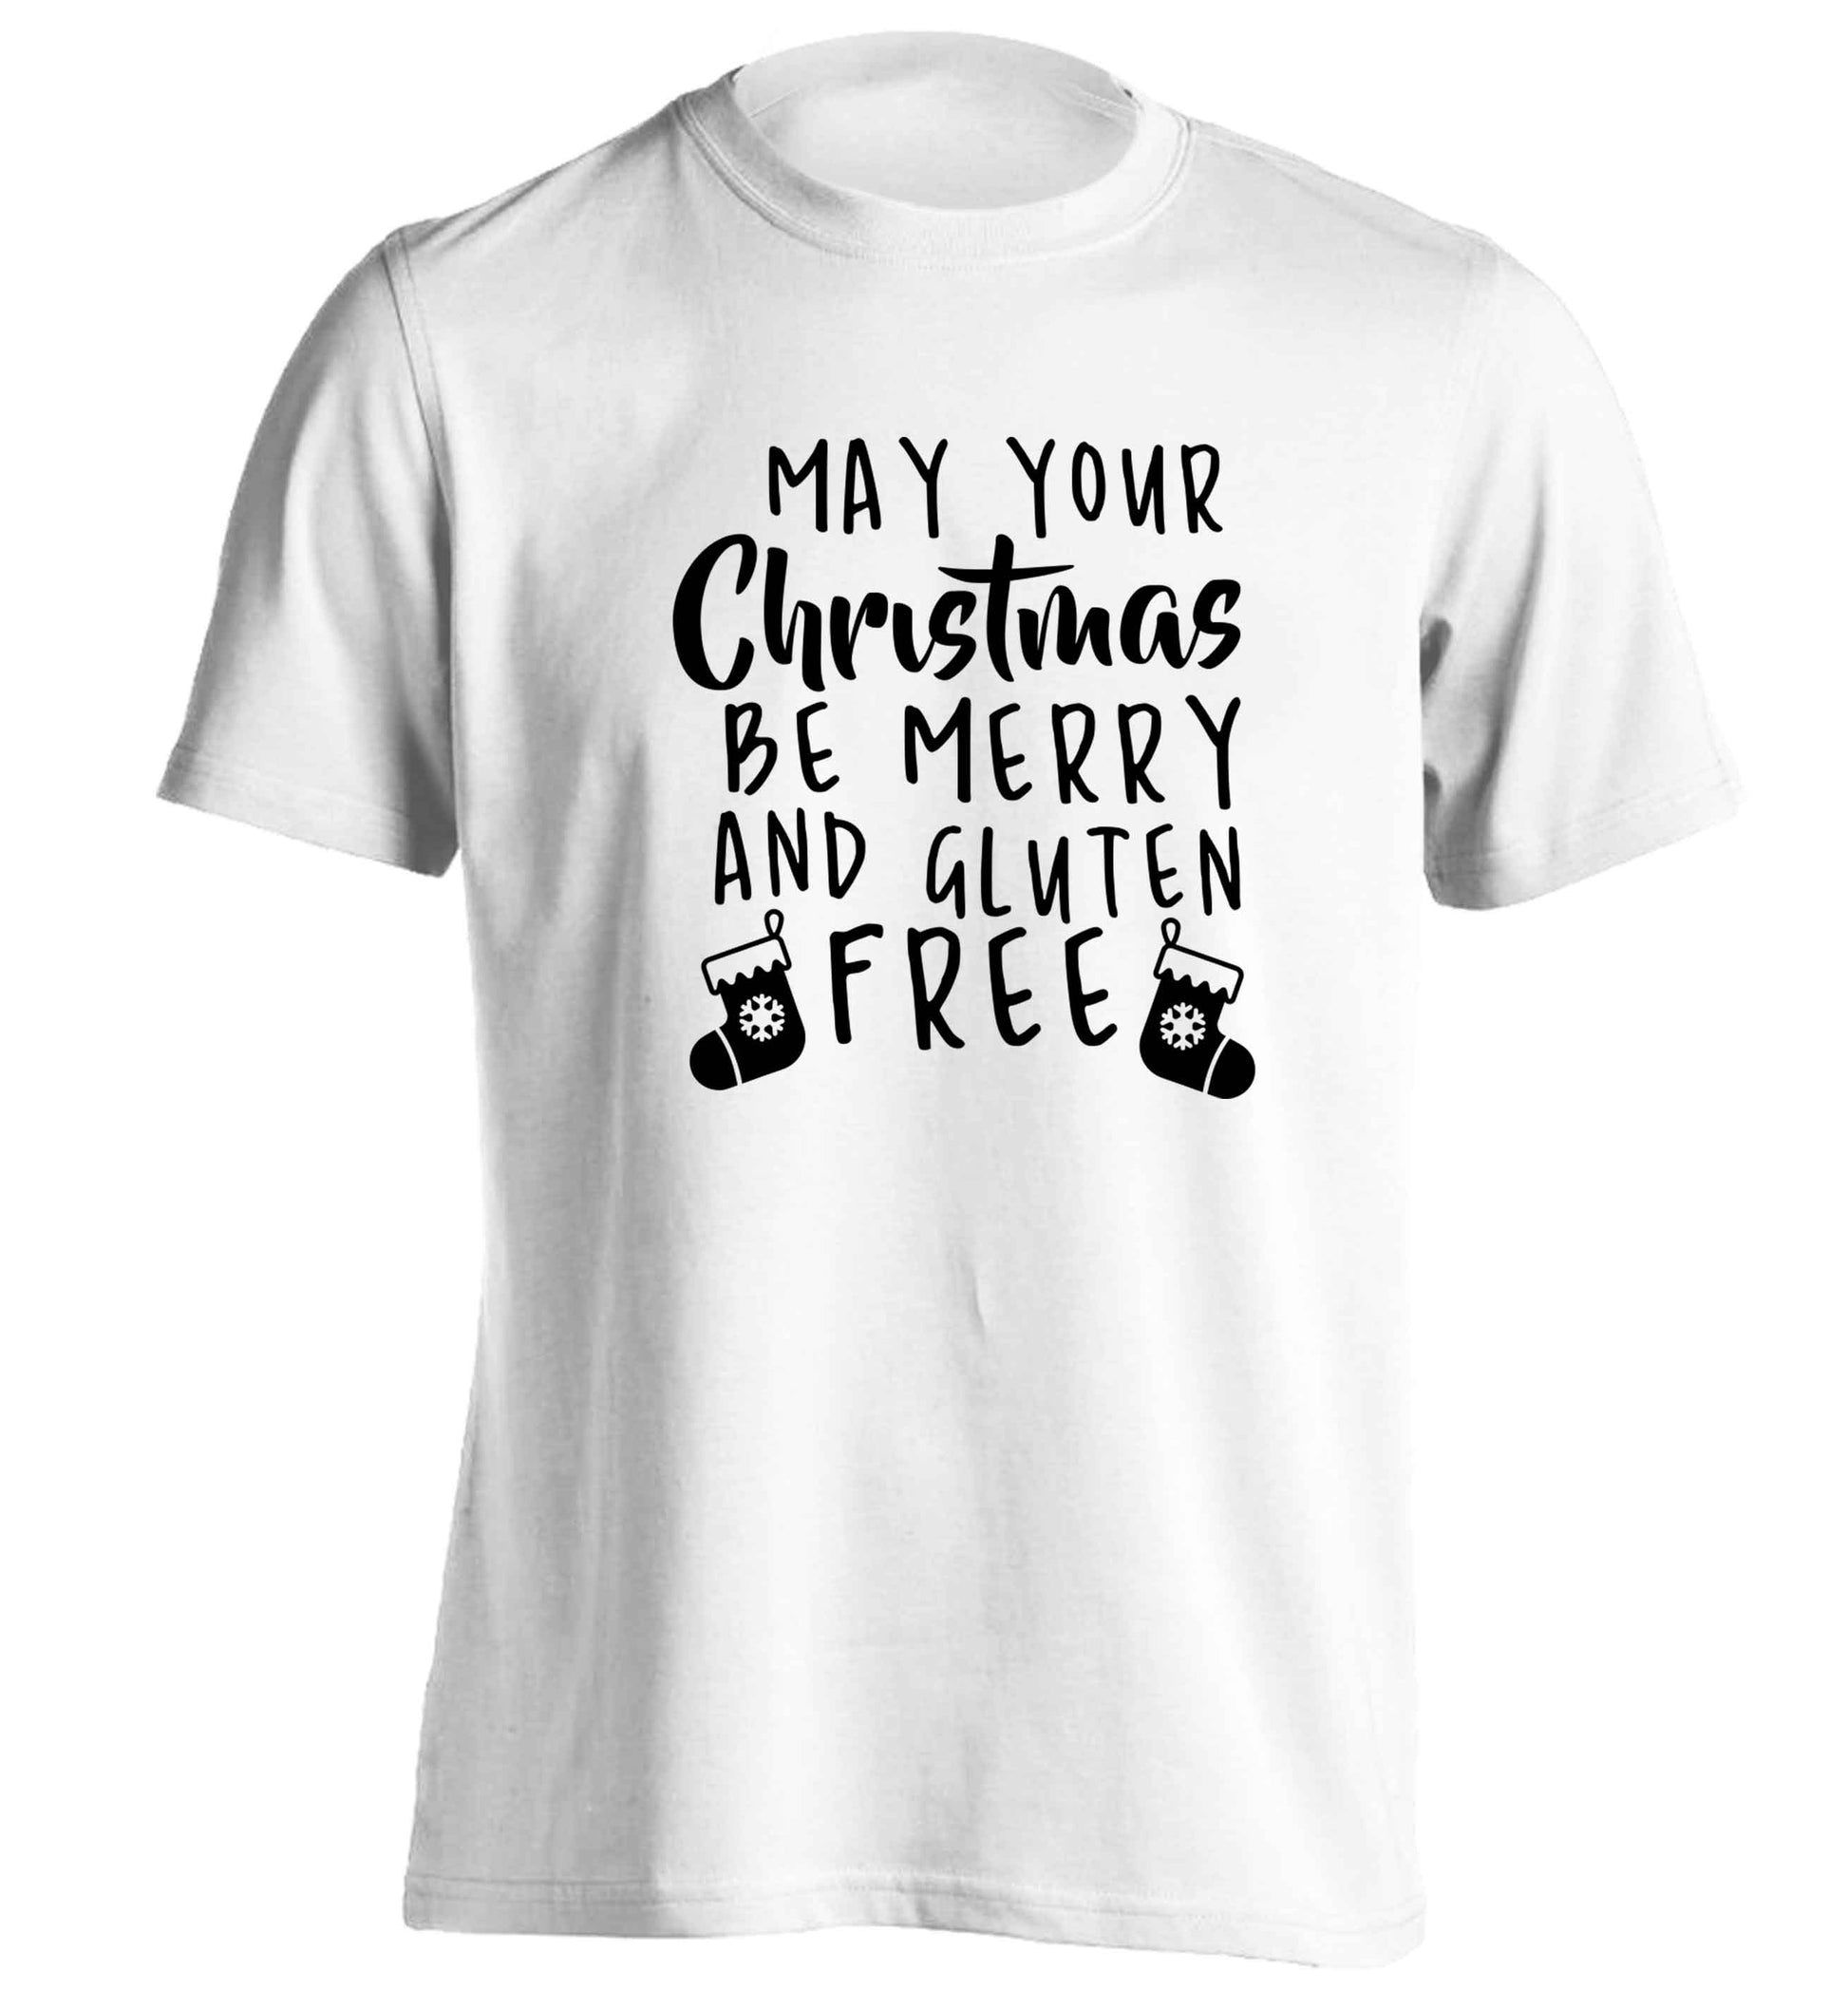 May your Christmas be merry and gluten free adults unisex white Tshirt 2XL